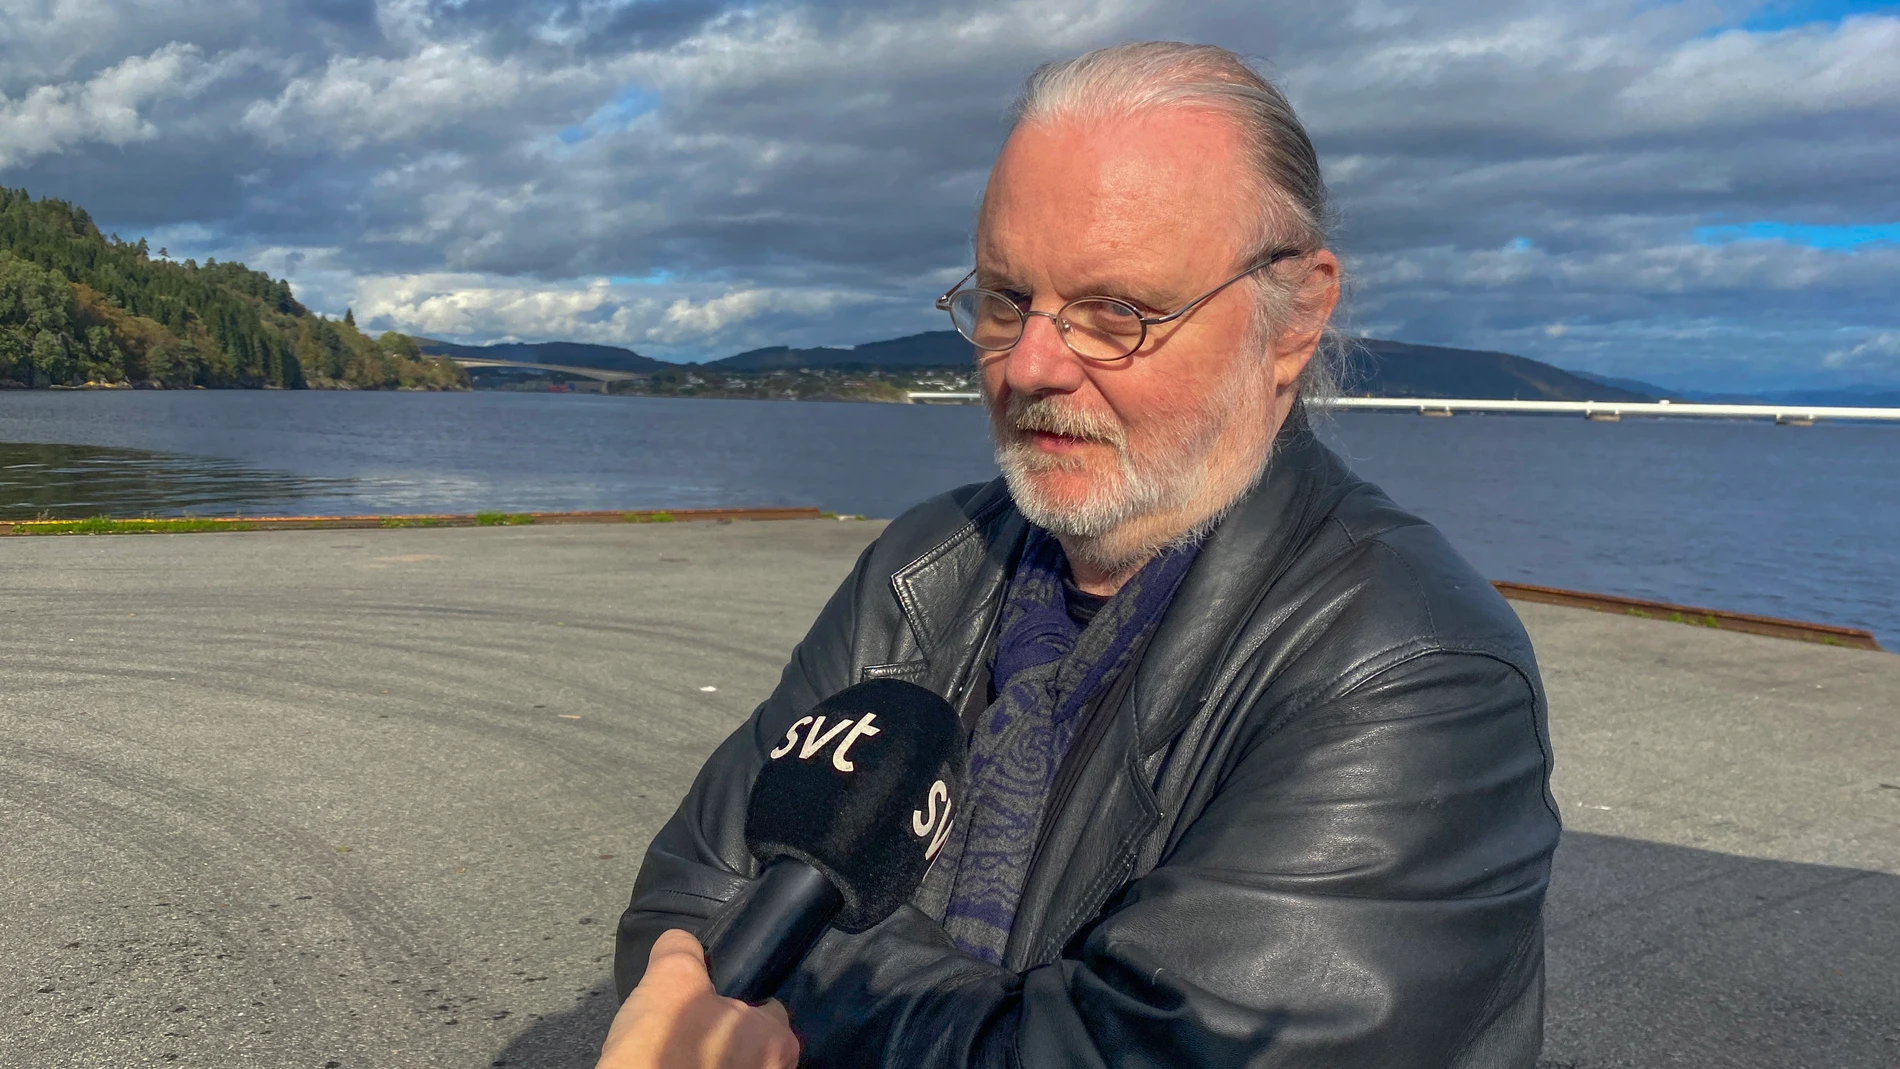 Frekhaug (Norway), 05/10/2023.- Norwegian writer Jon Fosse meets the press on a wharf at Frekhaug, Norway, 05 October 2023. Norwegian writer Jon Fosse was awarded with the 2023 Nobel Prize in Literature 'for his innovative plays and prose which give voice to the unsayable', the Swedish Academy announced. (Noruega, Suecia) EFE/EPA/GUNN BERIT WIIK / STRILEN NORWAY OUT 